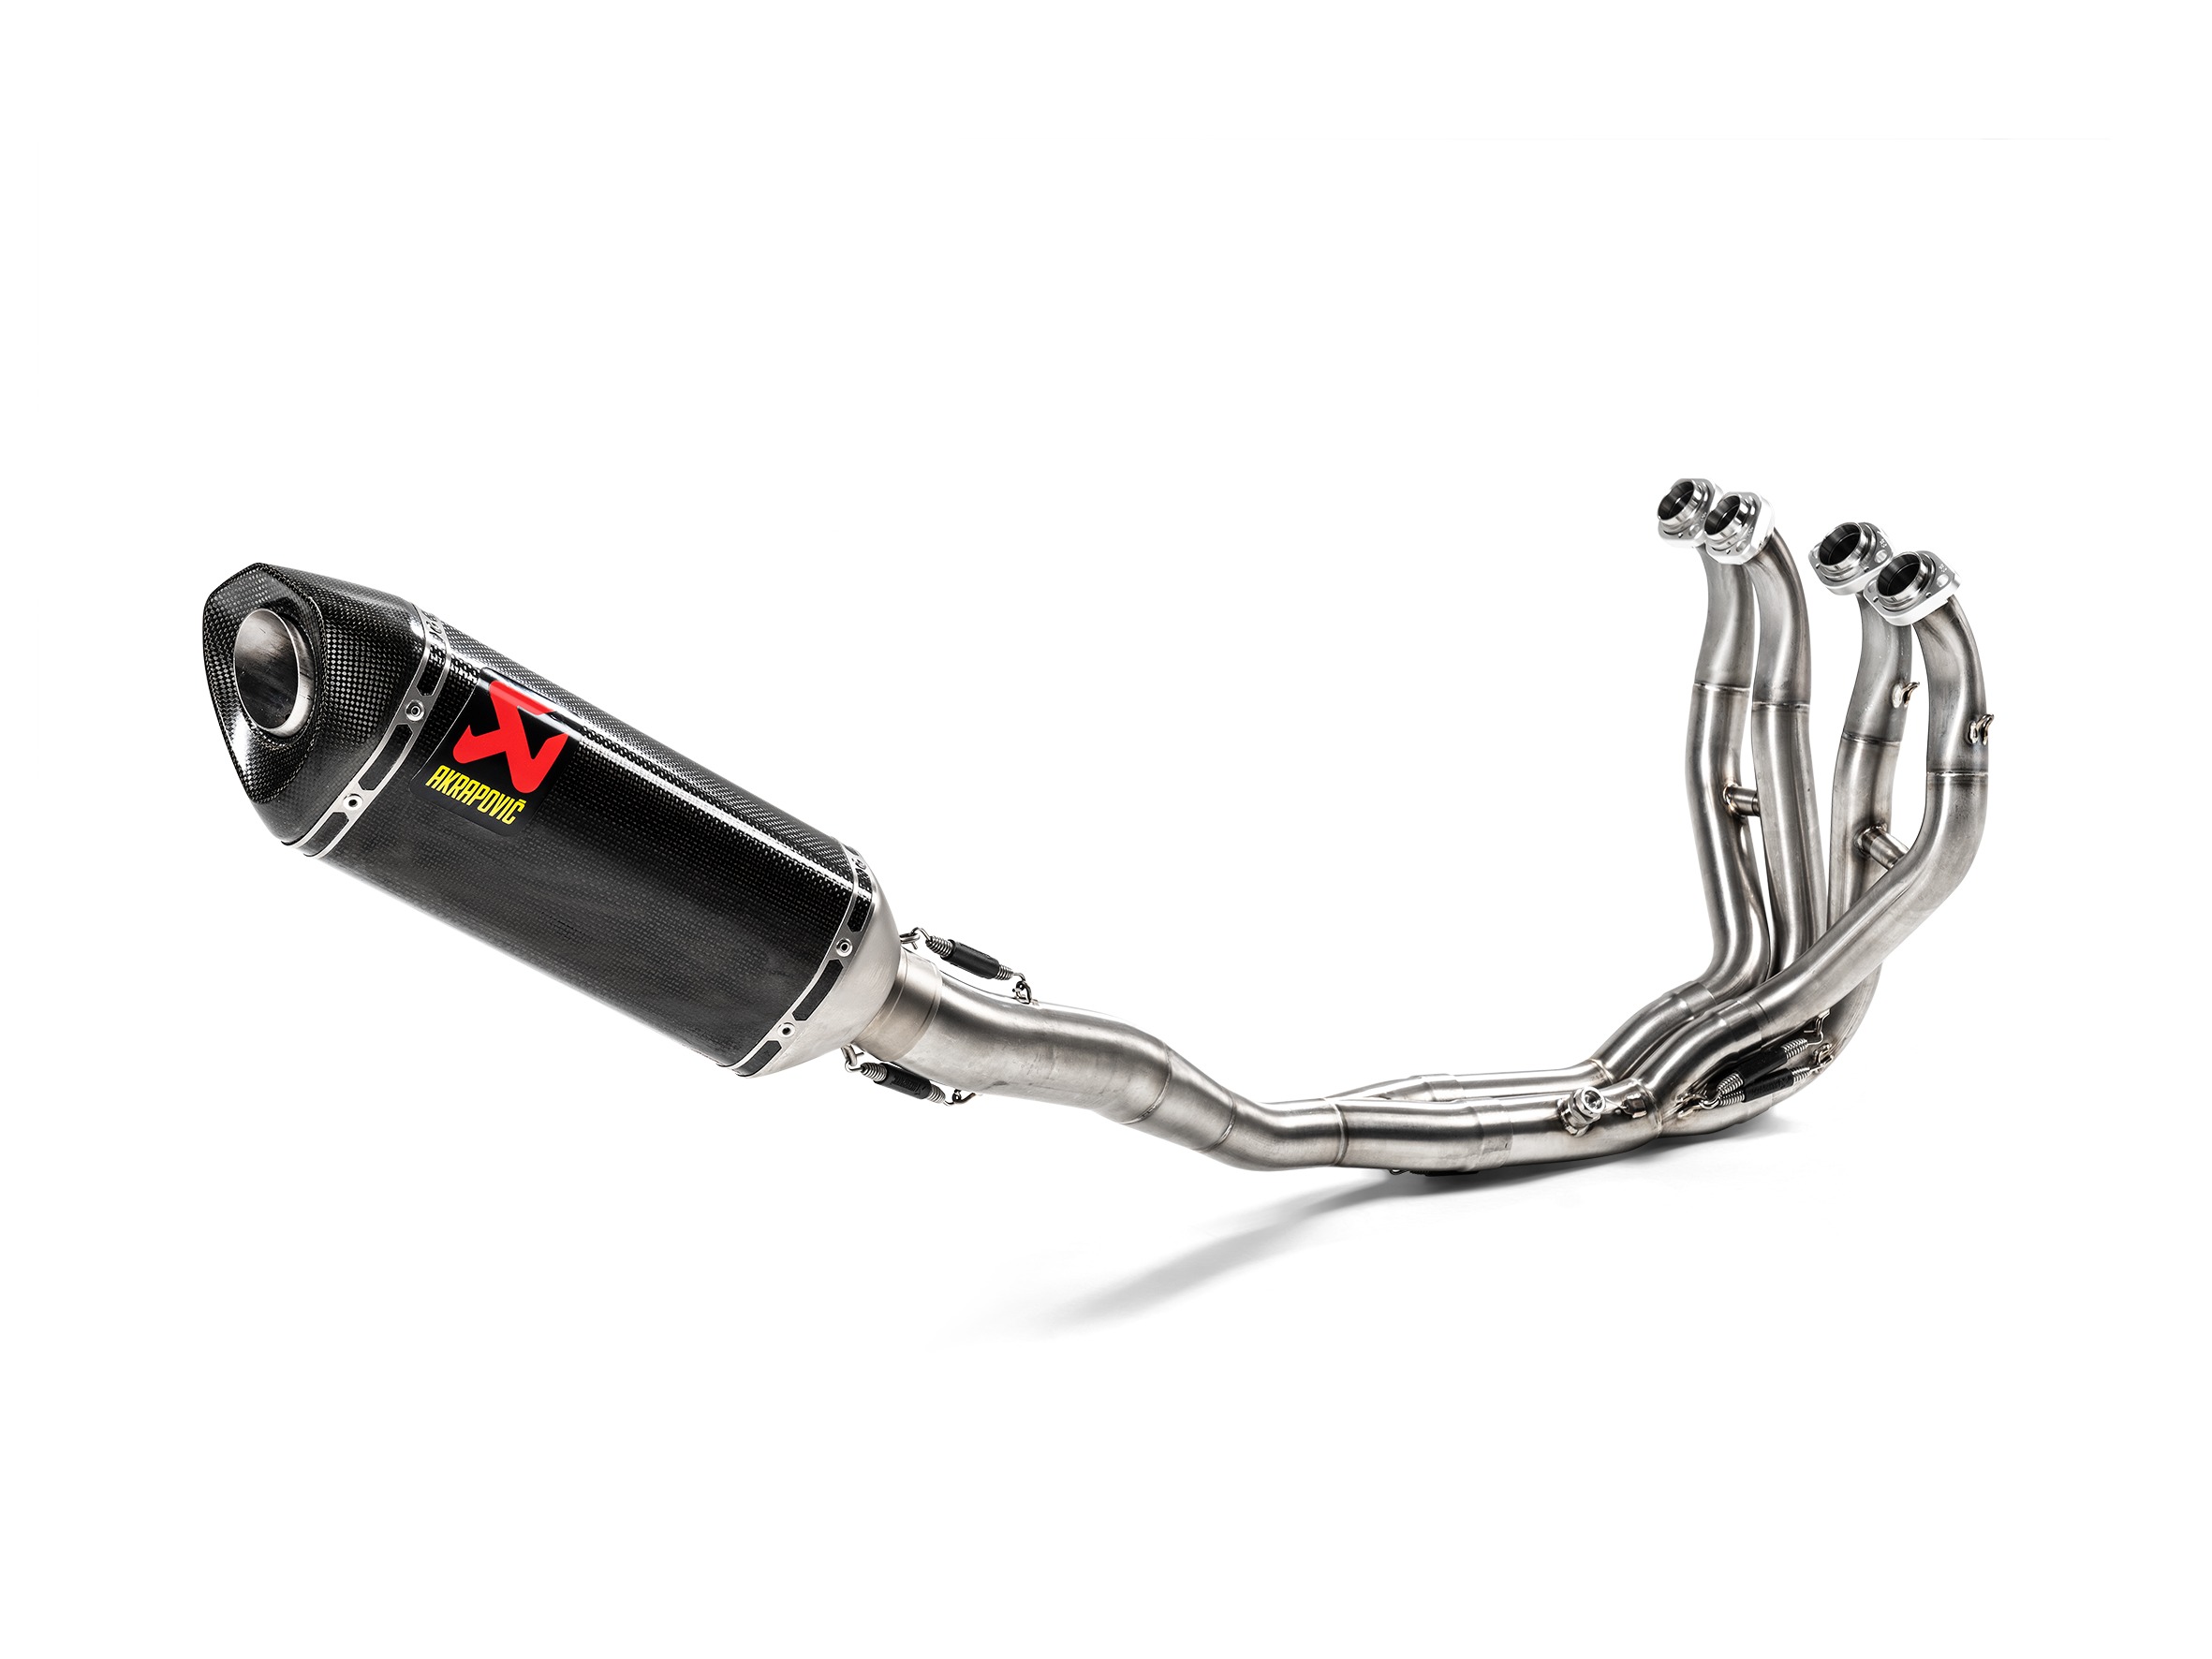 Racing Line Full Exhaust - S.S. / C.F. - For 09-20 Kawasaki ZX6R / ZX636 - Click Image to Close